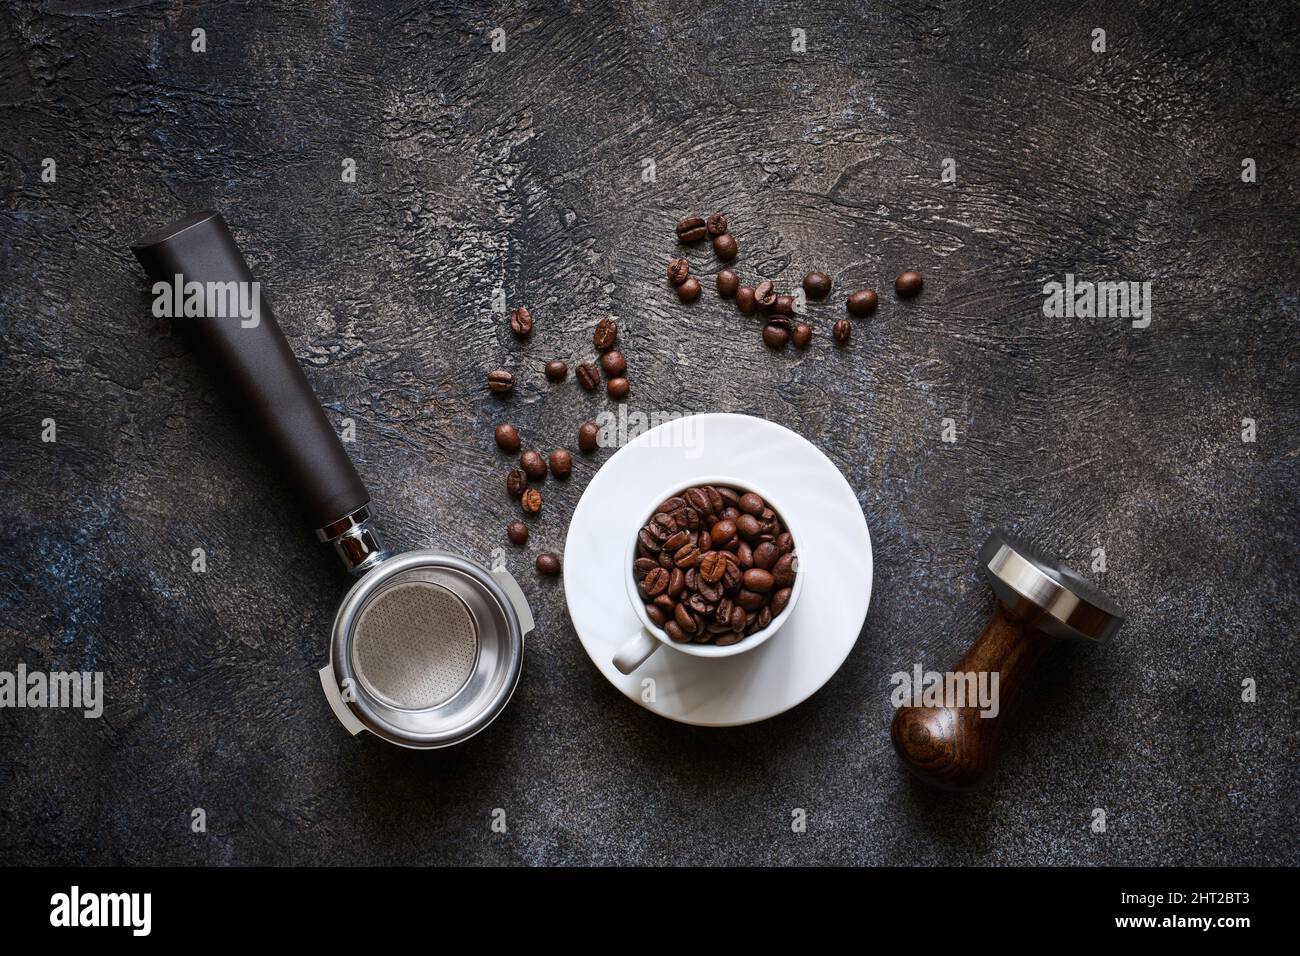 https://c8.alamy.com/comp/2HT2BT3/barista-tools-and-coffee-cup-with-beans-on-dark-textured-stone-background-top-view-with-copy-space-2HT2BT3.jpg